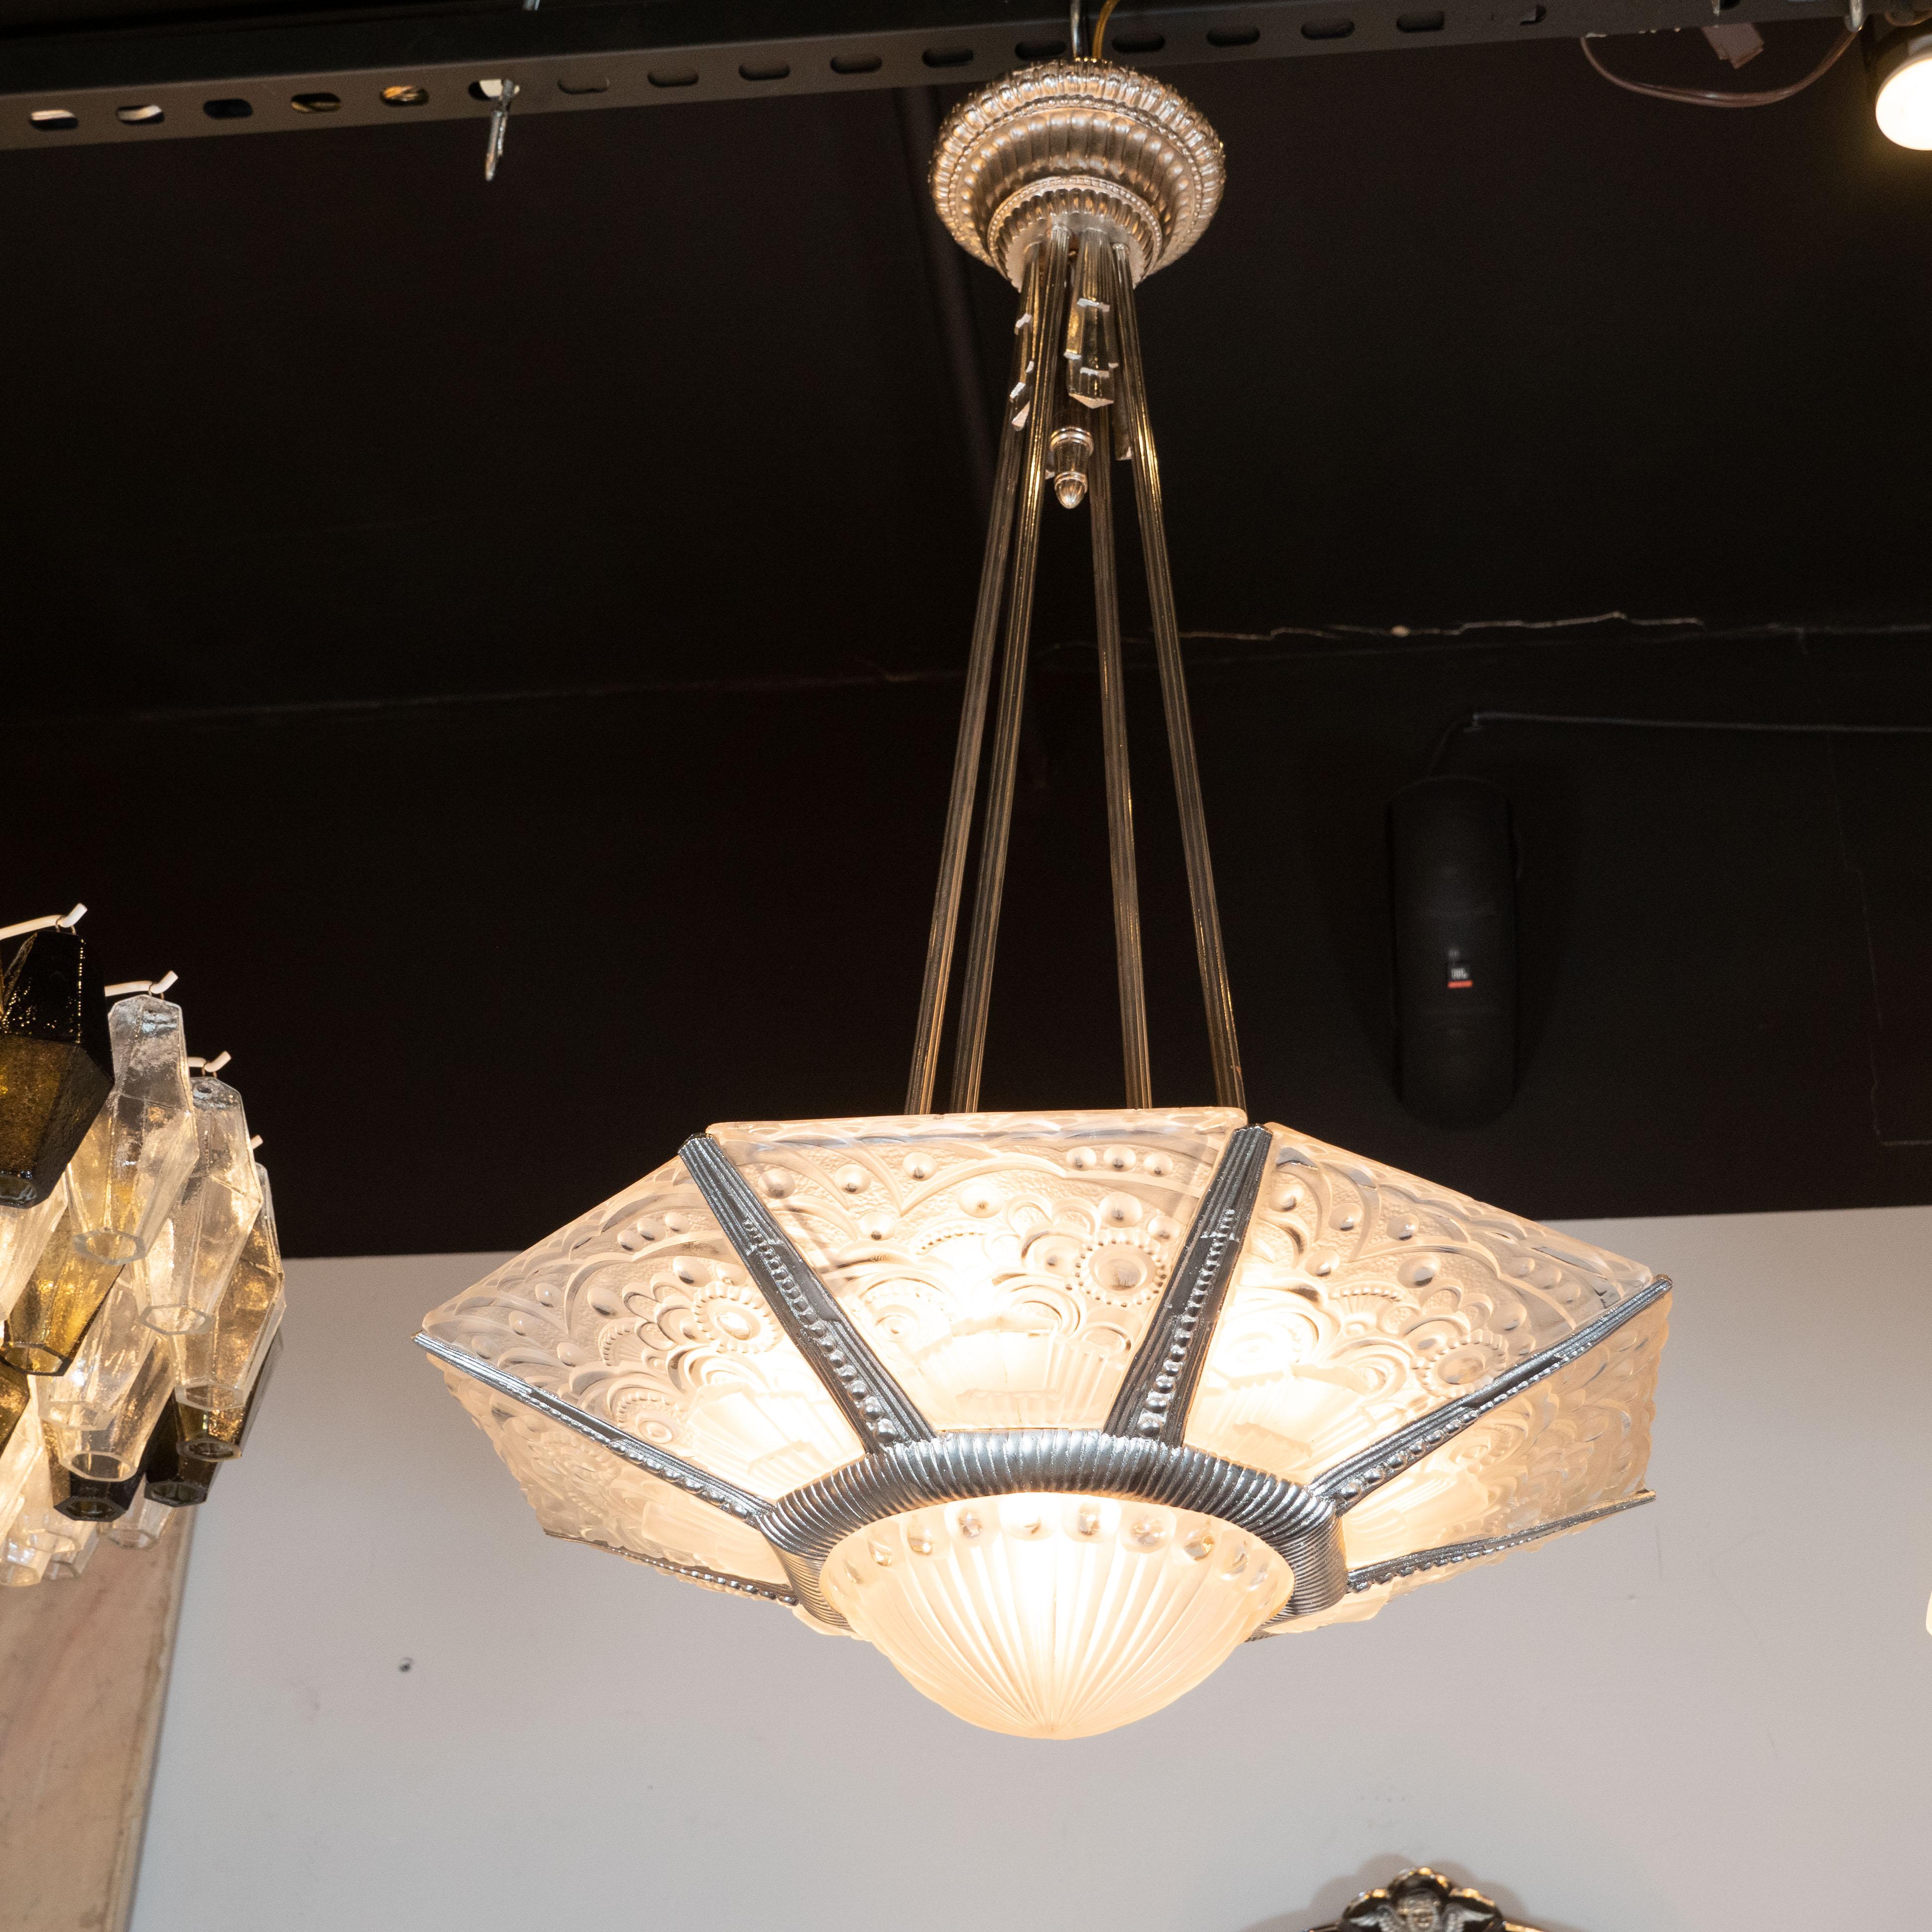 This stunning high style Art Deco skyscraper style chandelier was realized by the esteemed atelier of Georges Leleu in France circa 1930. It features a convex striated bottom shade that connects to an octagonal frame with similar channel detailing.